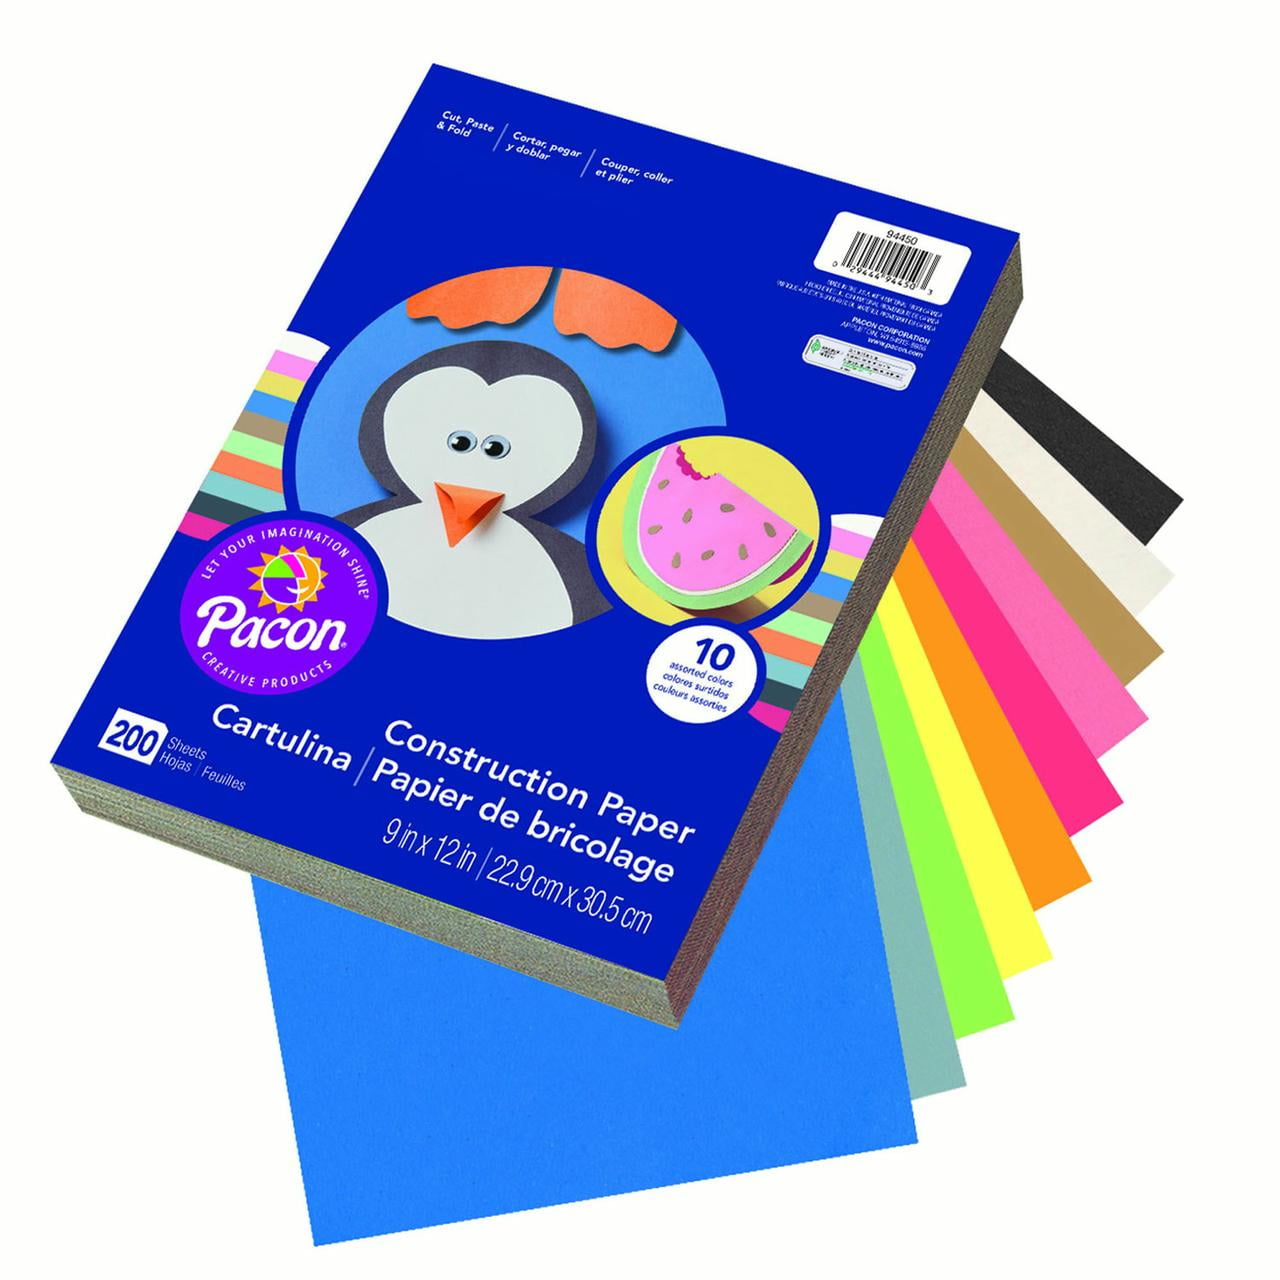 Construction Paper,White,12 inches x 18 inches,200 Sheets,Heavyweight  Construction Paper,Crafts,Art,Kids Art,Painting,Coloring,Drawing,Paper,Art